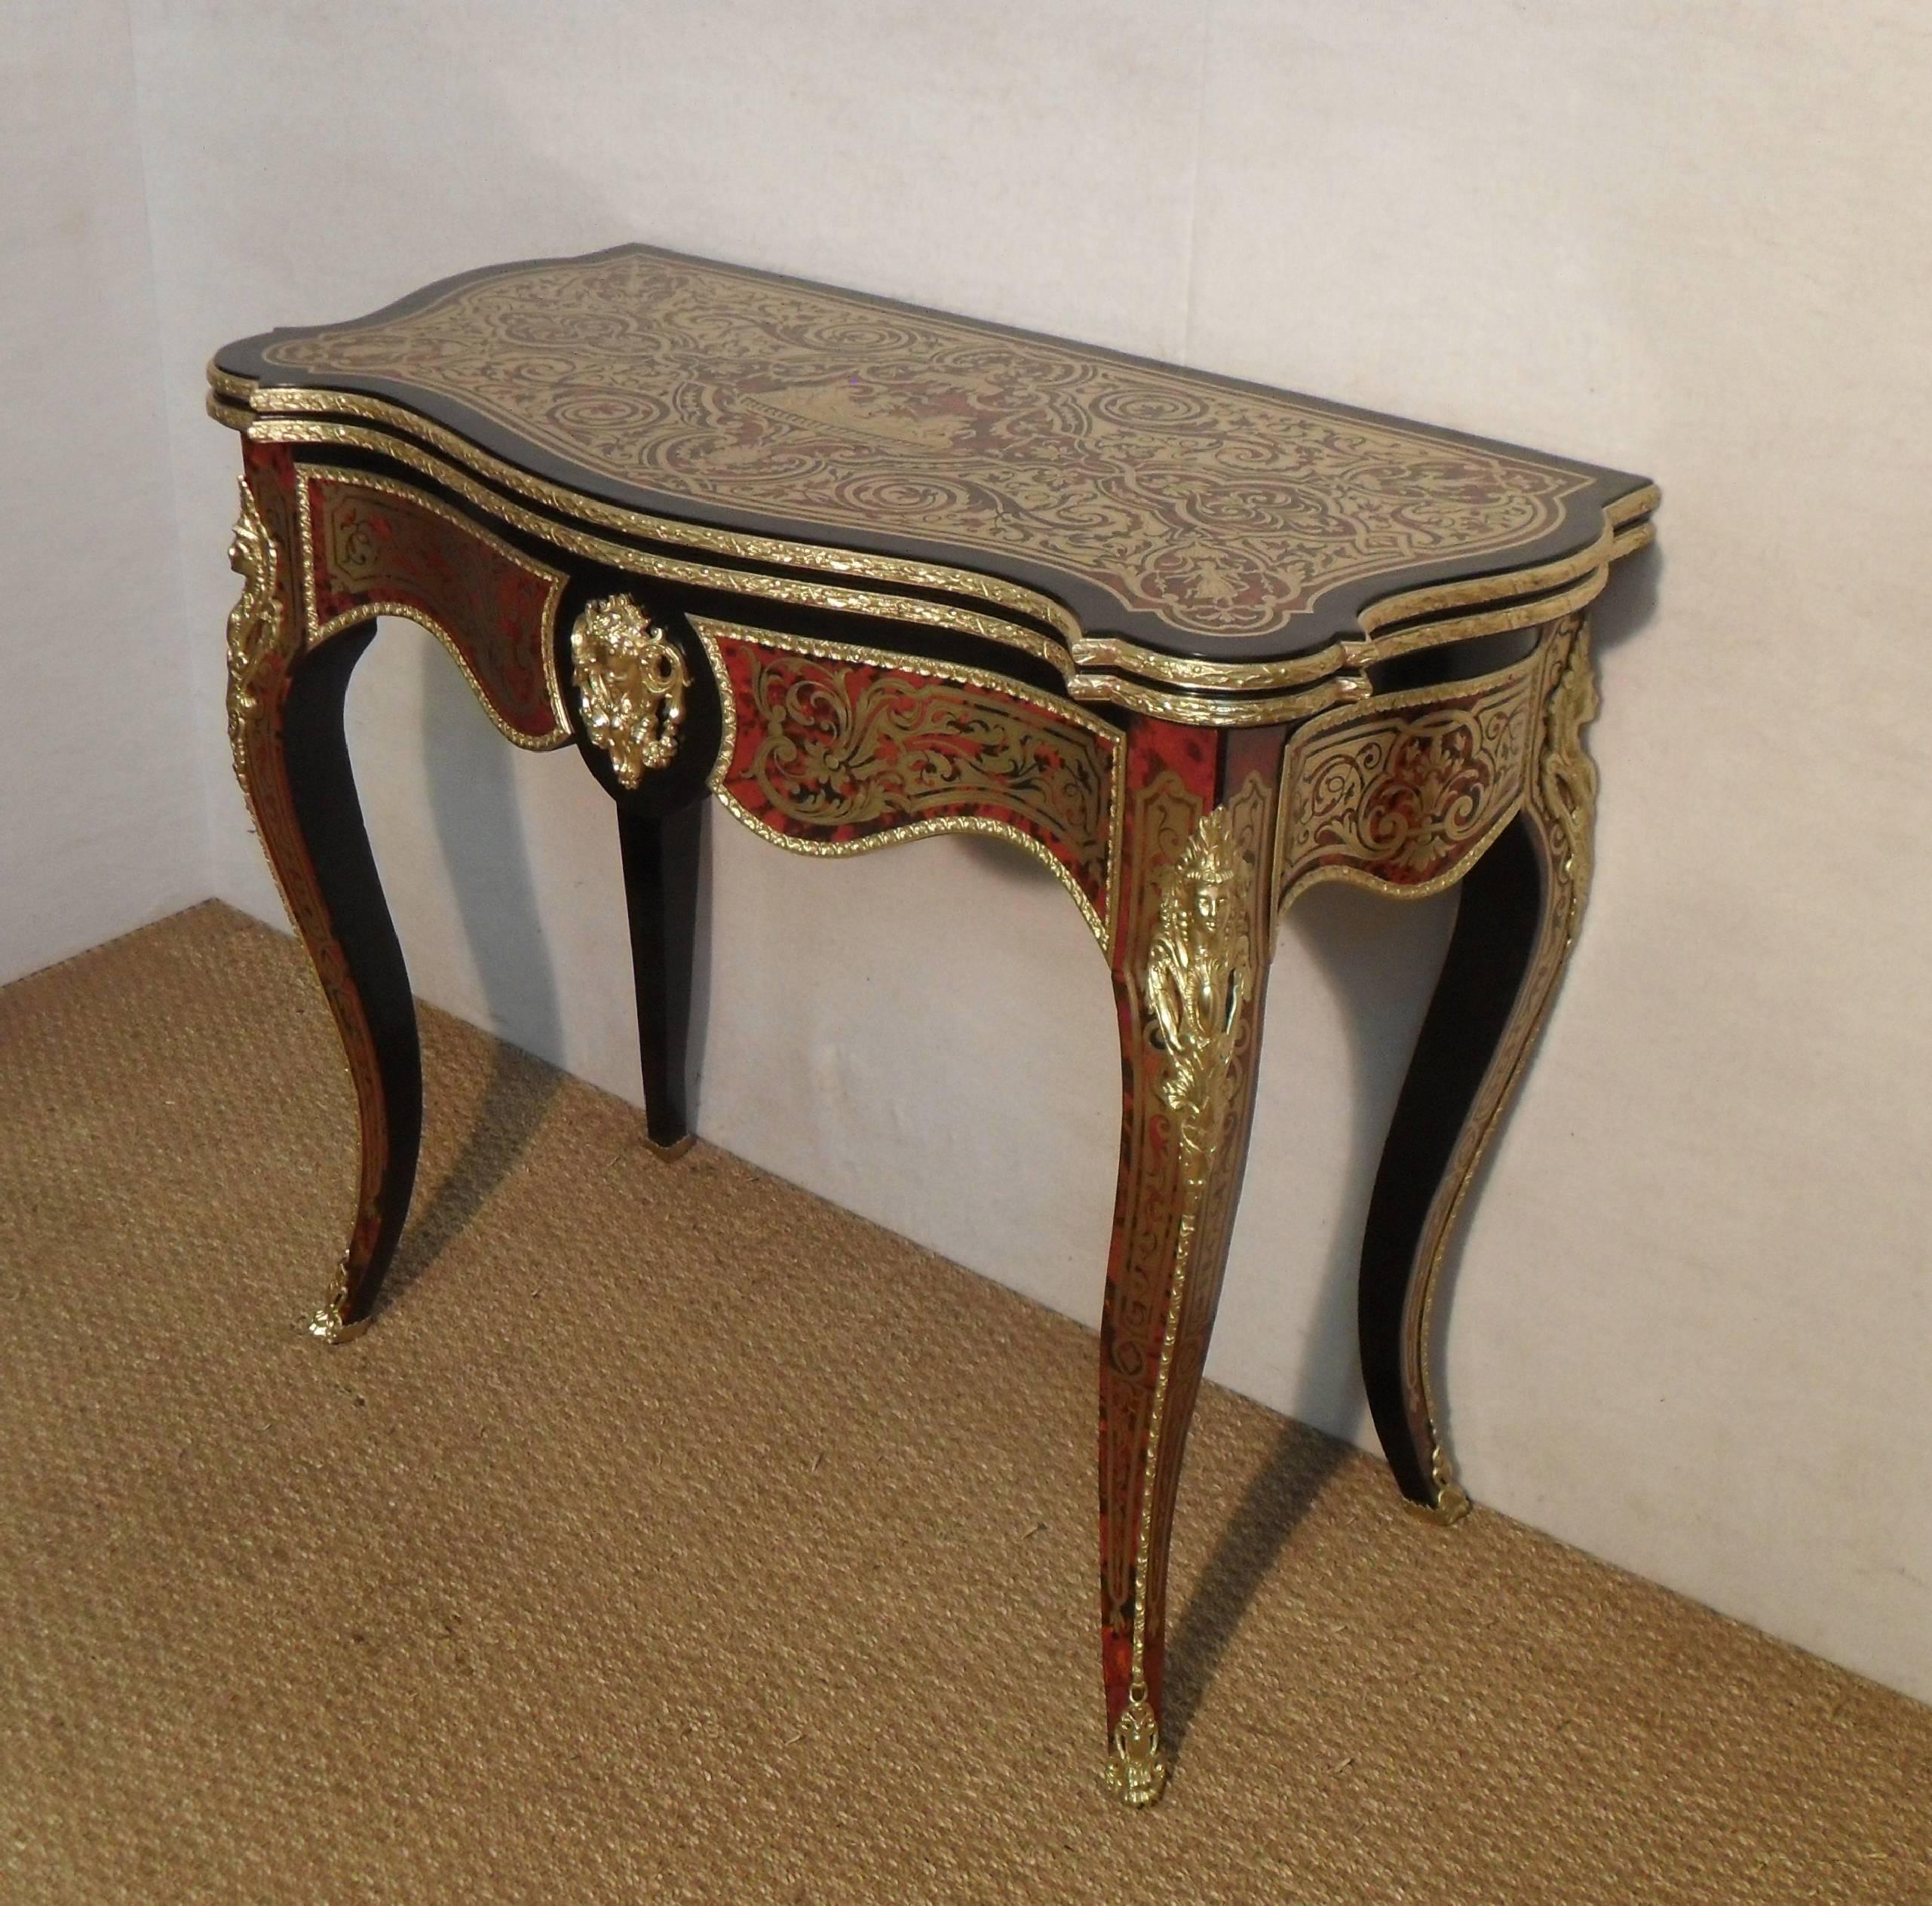 An excellent quality French Napoleon III freestanding serpentine shaped fold over games table inlaid with engraved brass and red tortoise shell with ebonised detail. The top has a central design of cherub on chariot and horses with a decorative